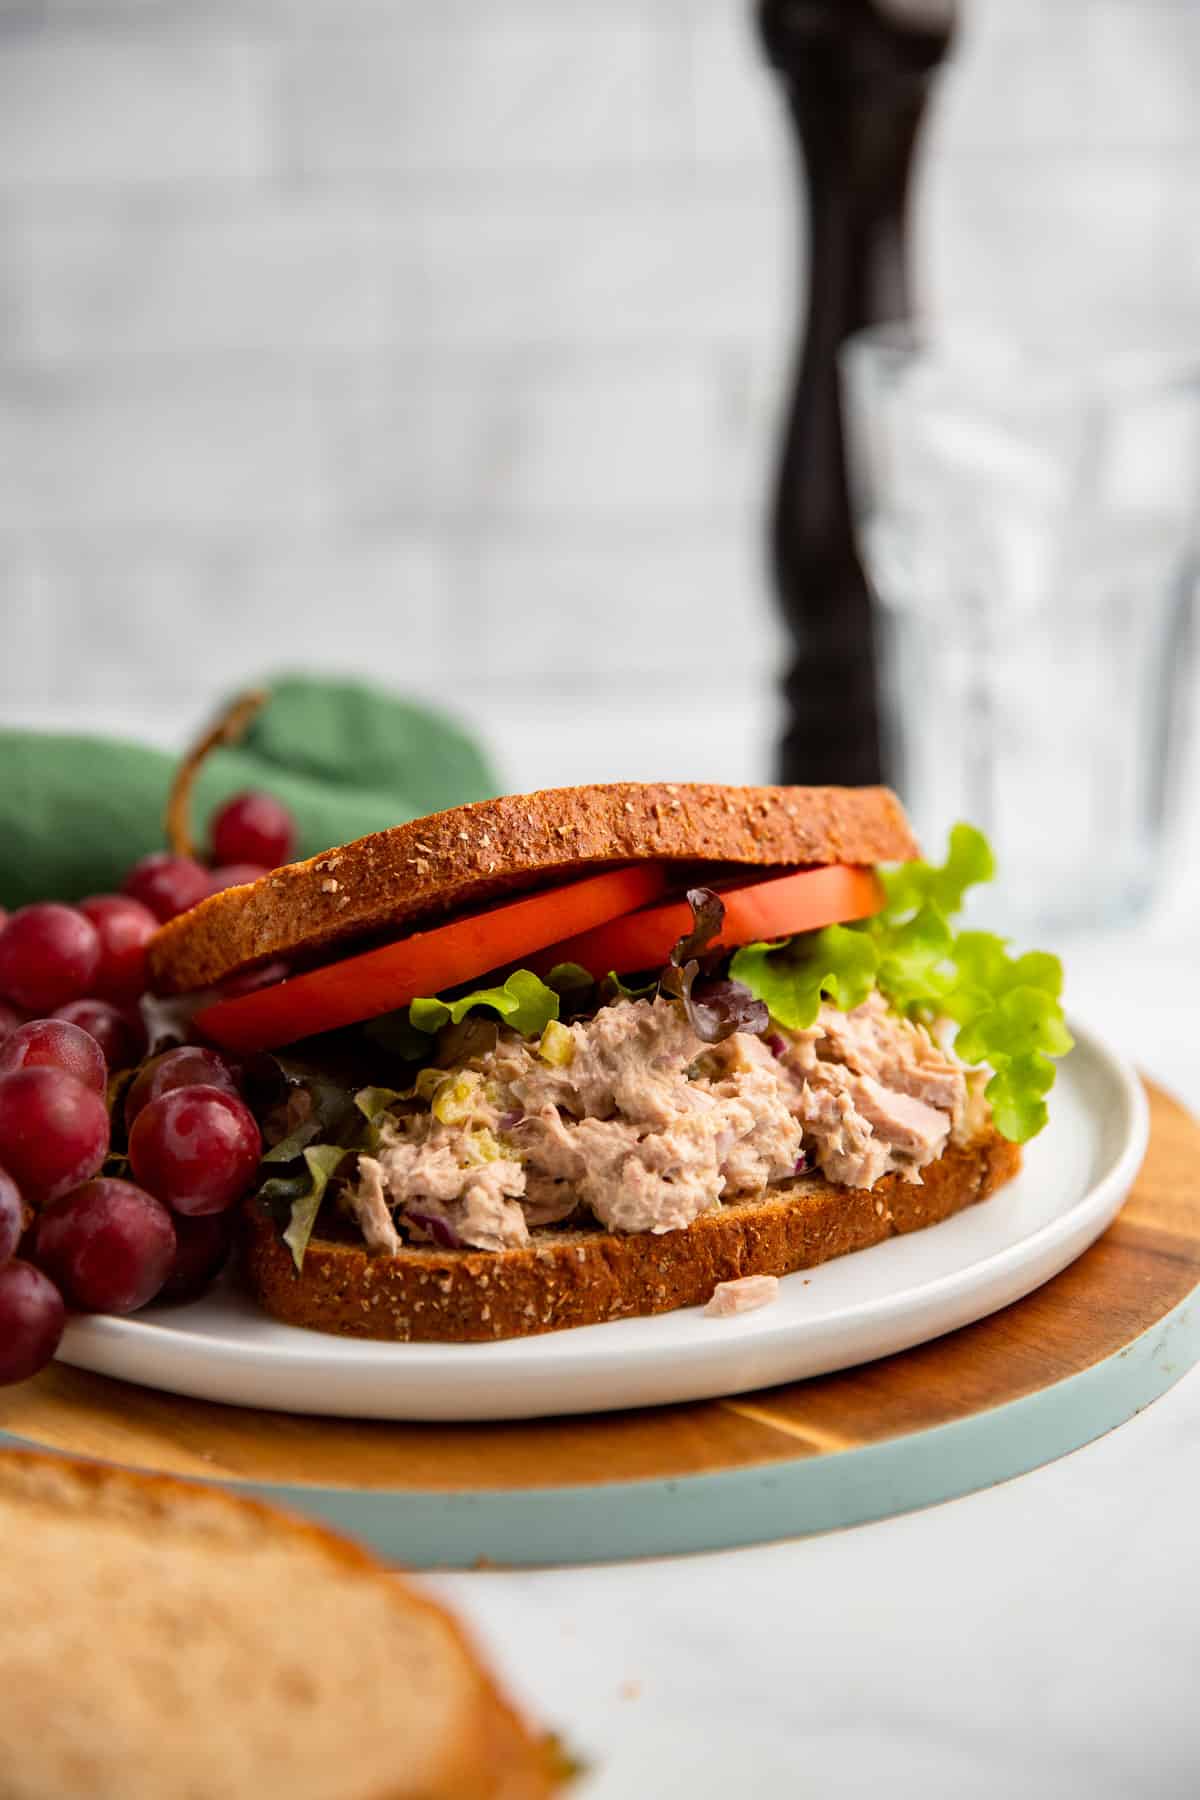 healthy tuna salad sandwich with tomato and lettuce on a plate with grapes.